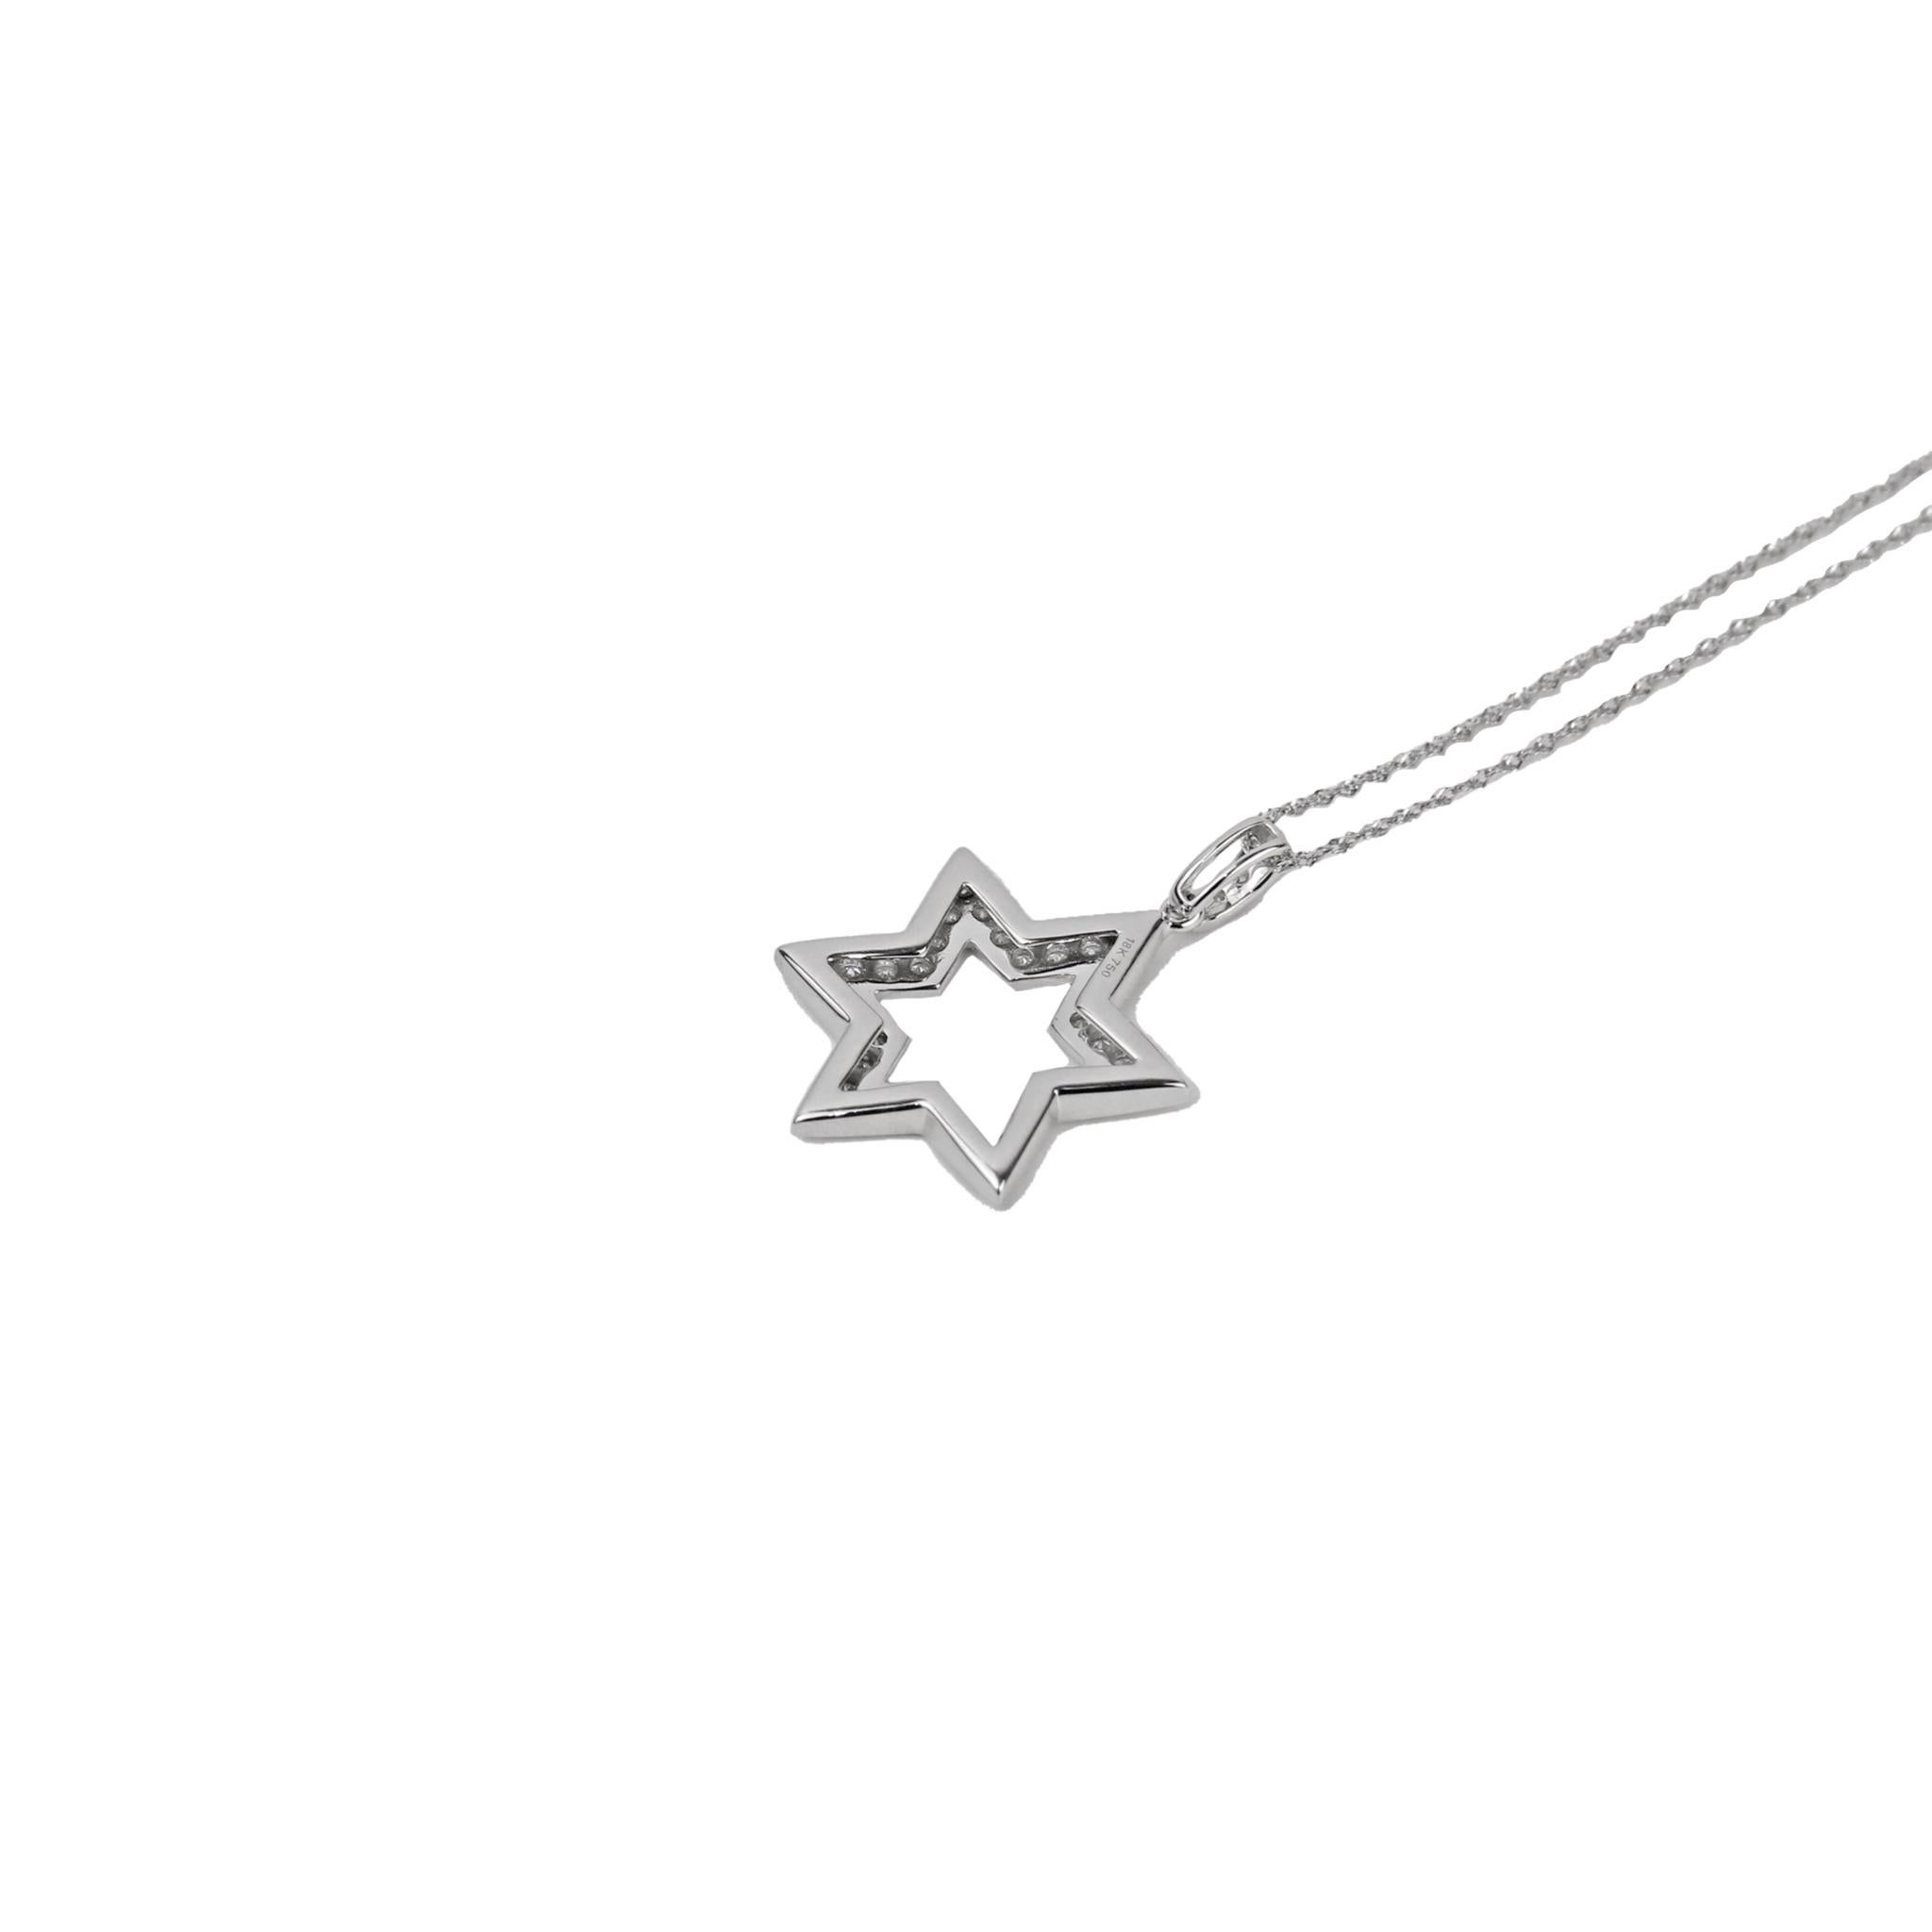 East Coast Jewelry Collection Star of David Necklace
Diamond: 0.80ctw
Reference number: ECJ02810